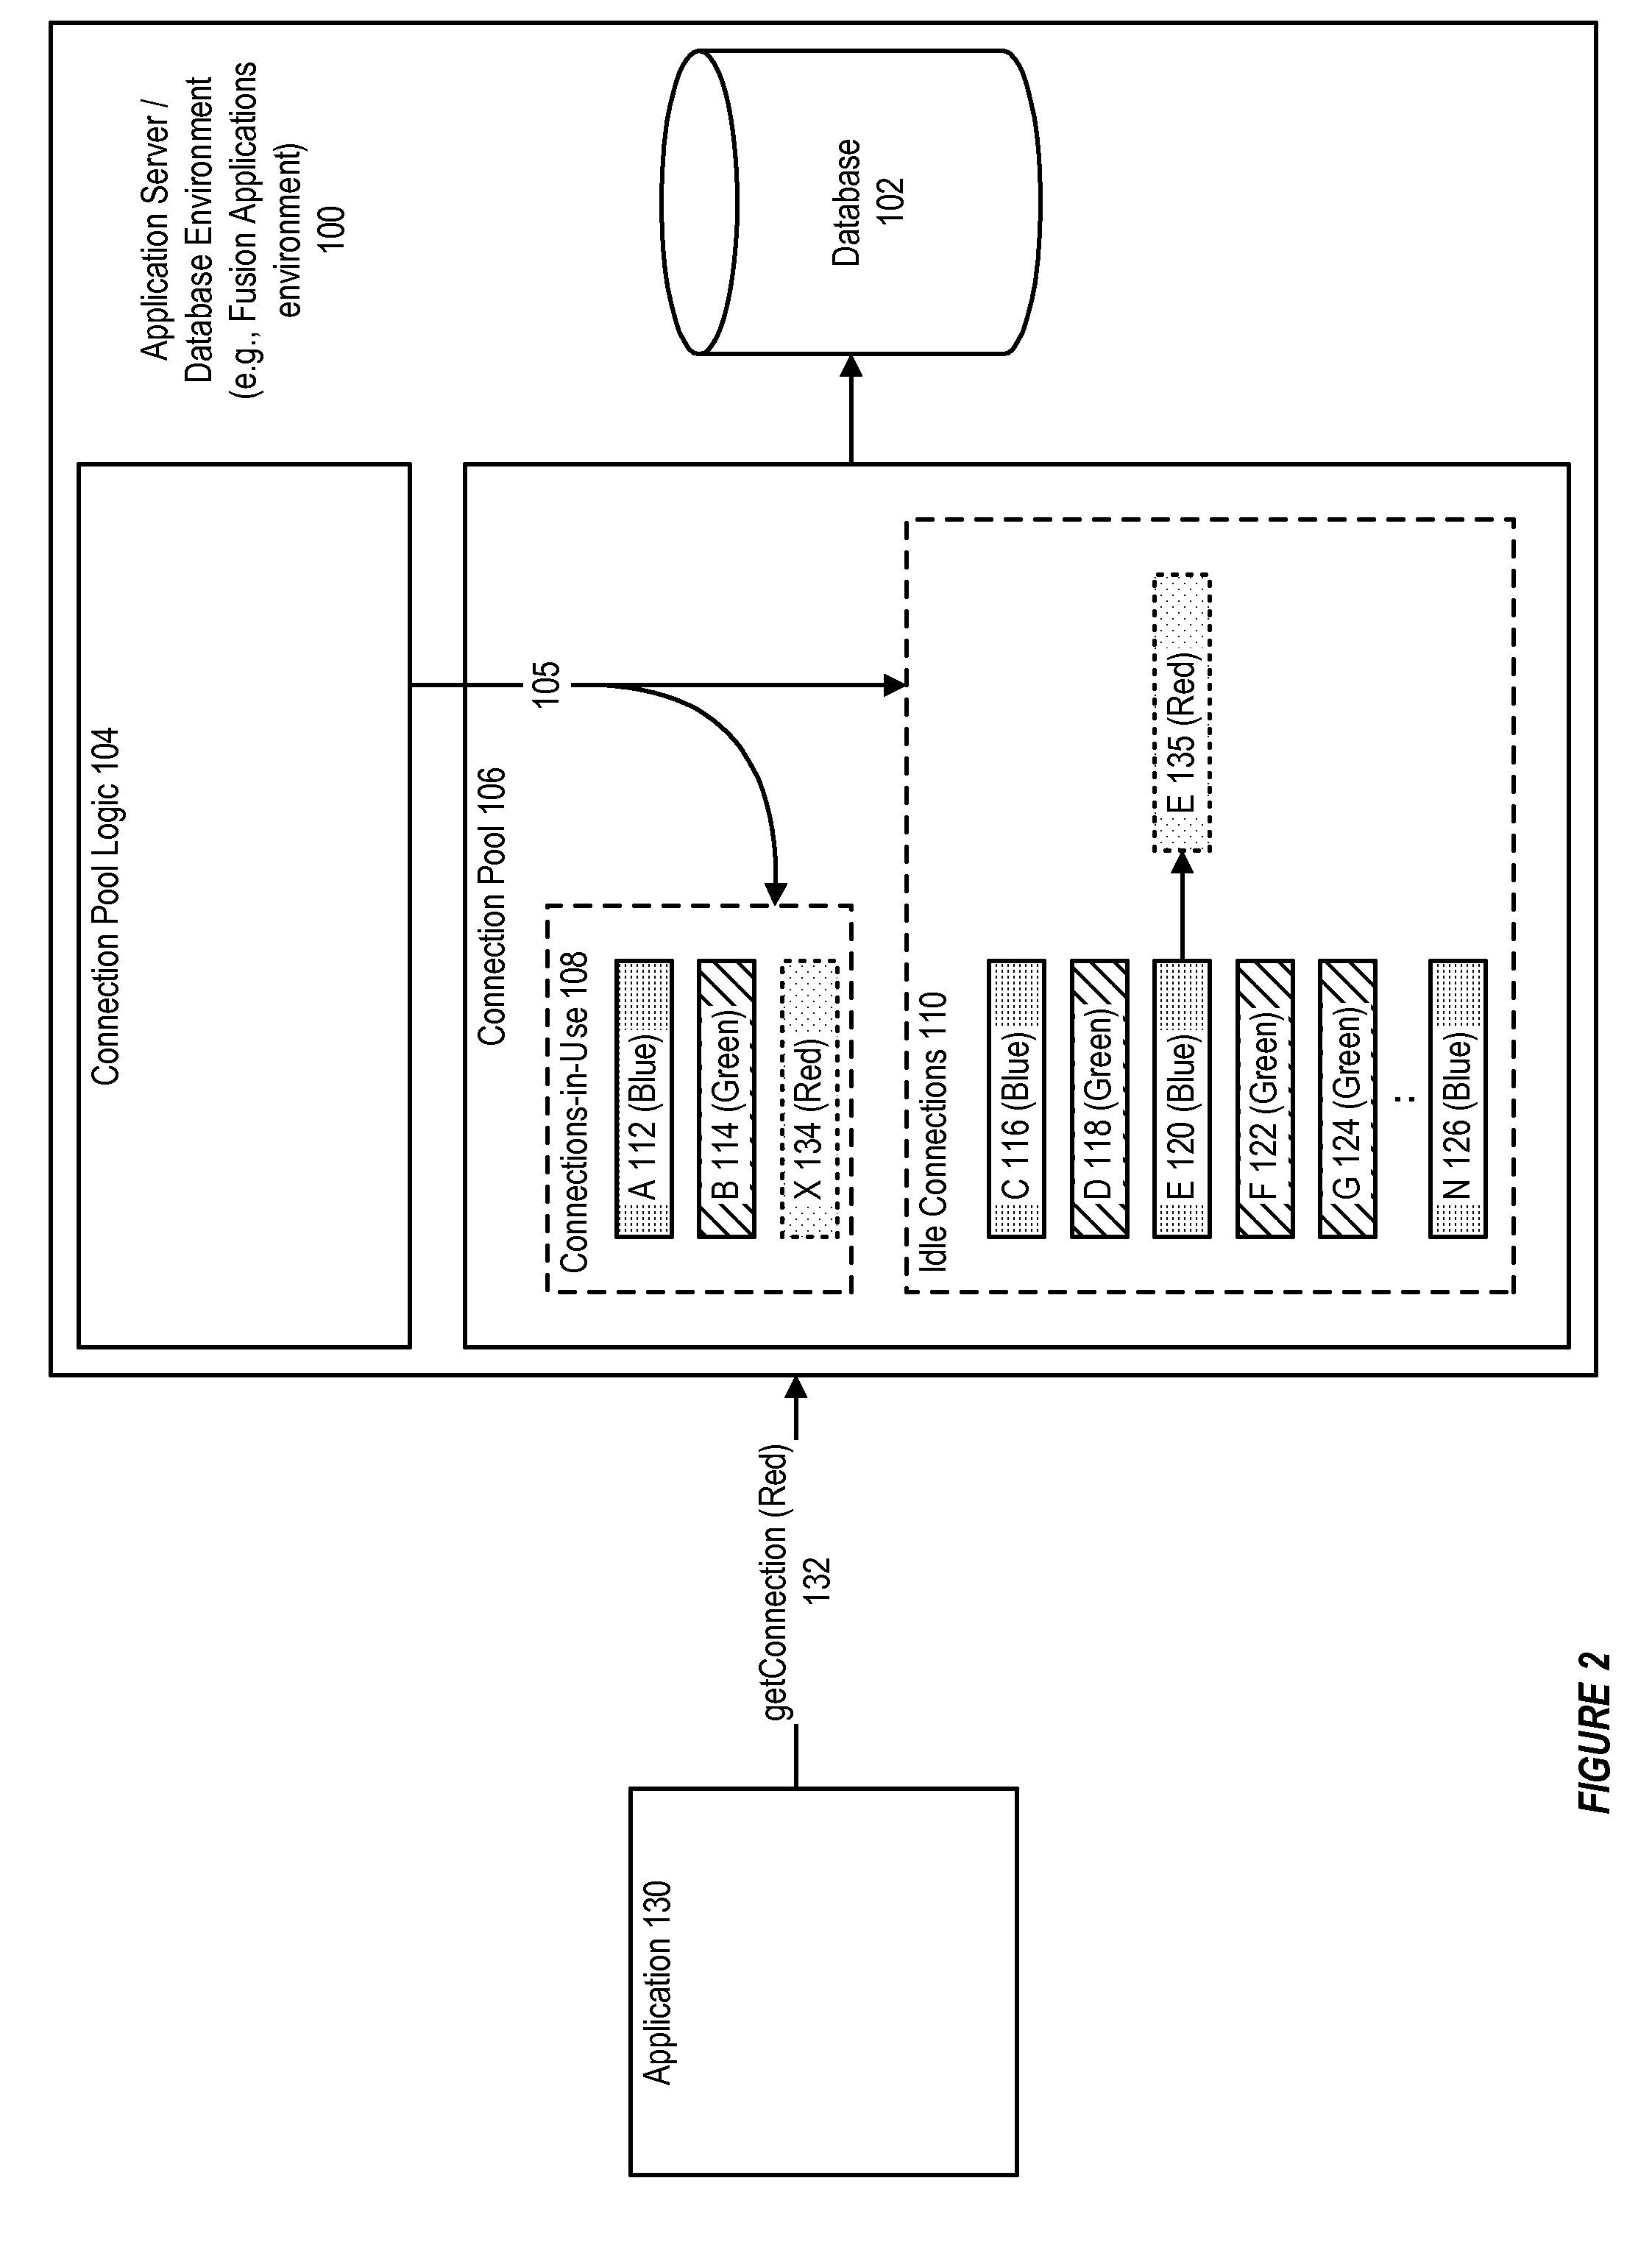 Support for cloud-based multi-tenant environments using connection labeling